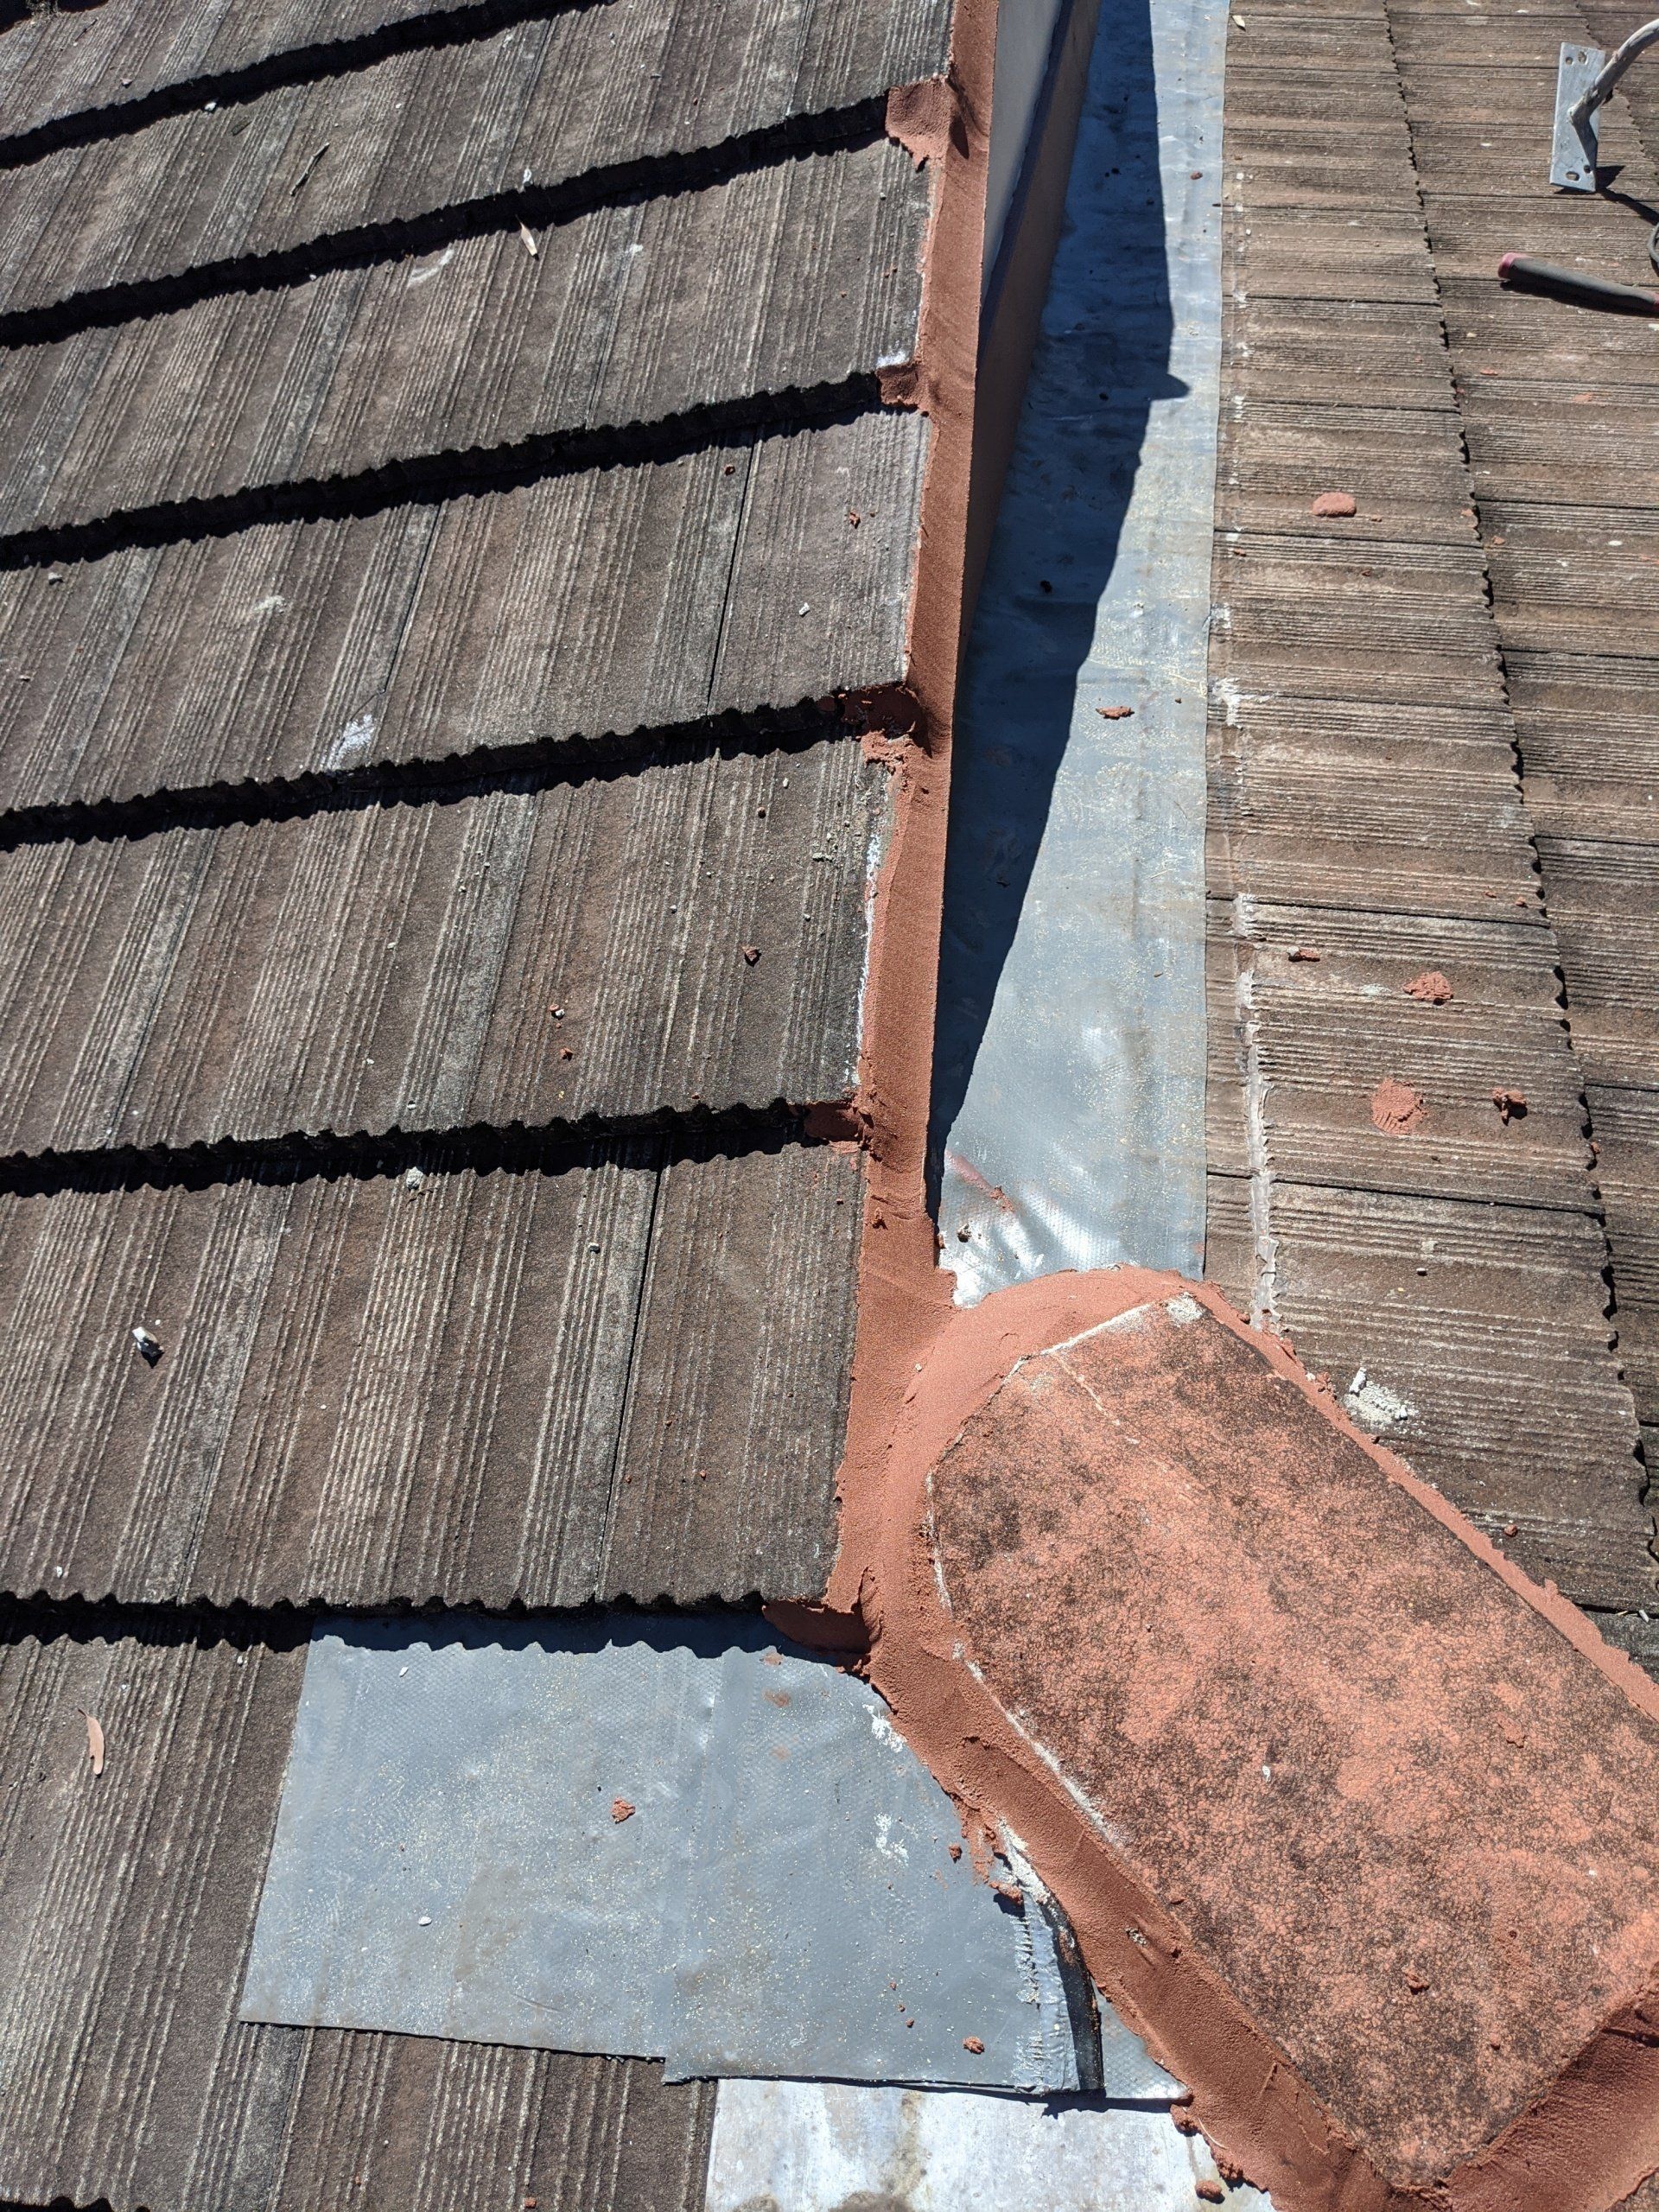 Tiled Roof Getting Repaired - Roofing Specialist in Port Stephens, NSW